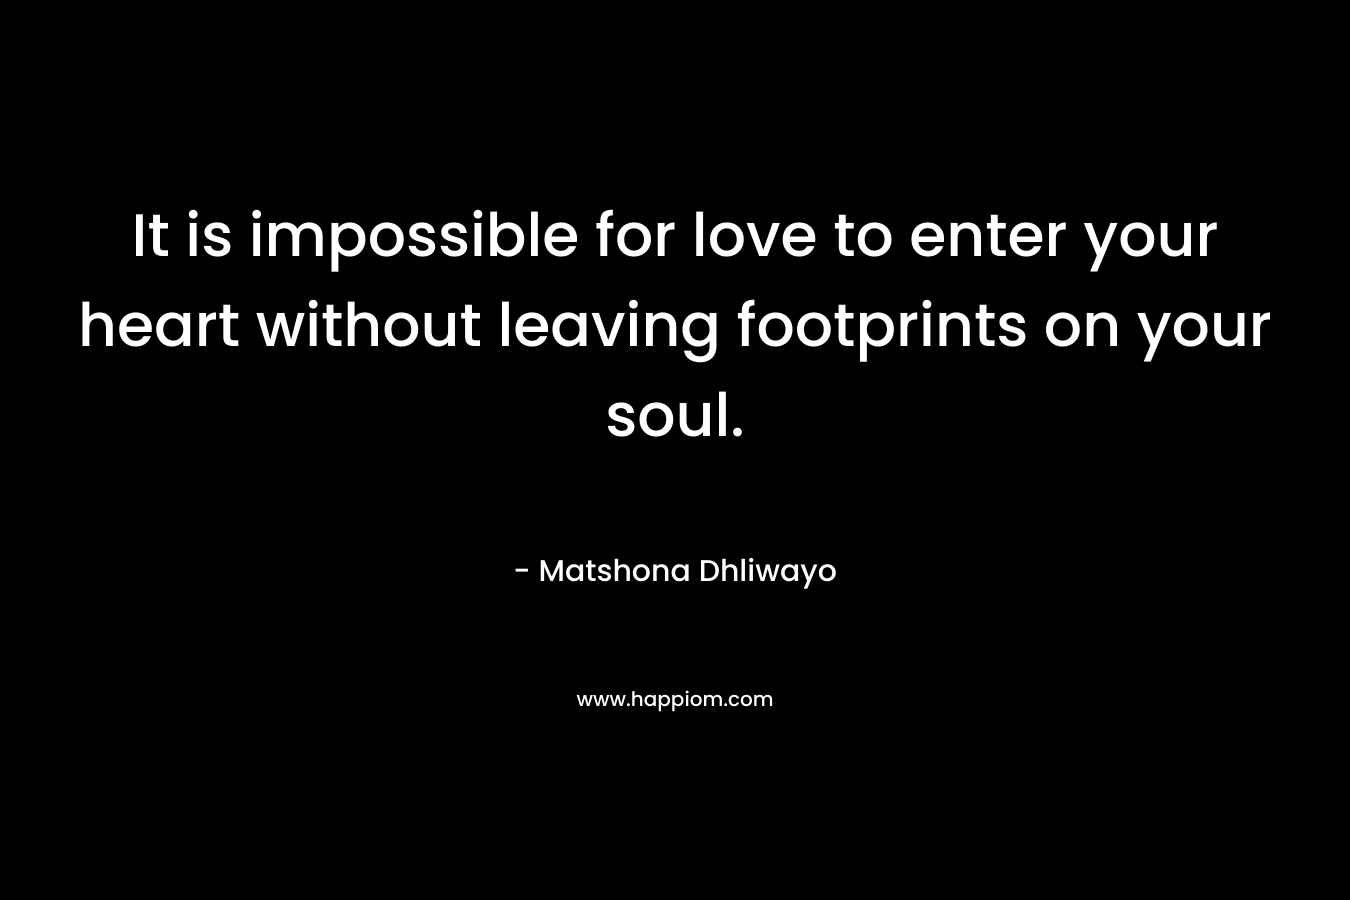 It is impossible for love to enter your heart without leaving footprints on your soul.